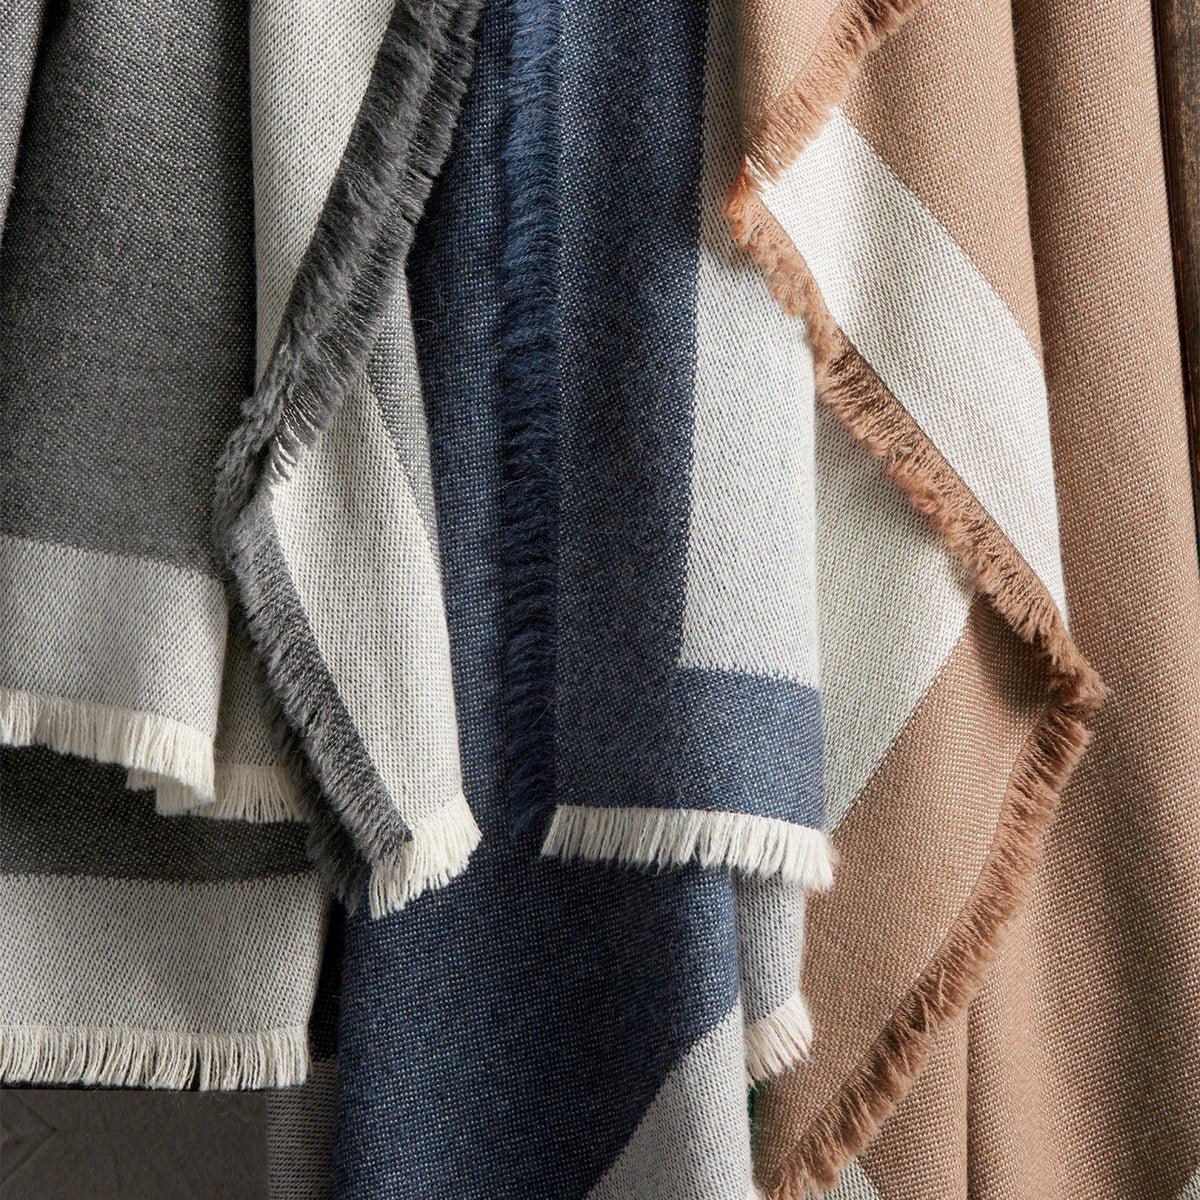 Suri Alpaca Throw Blanket by Matouk | Fig Linens and Home - FIG LINENS ...